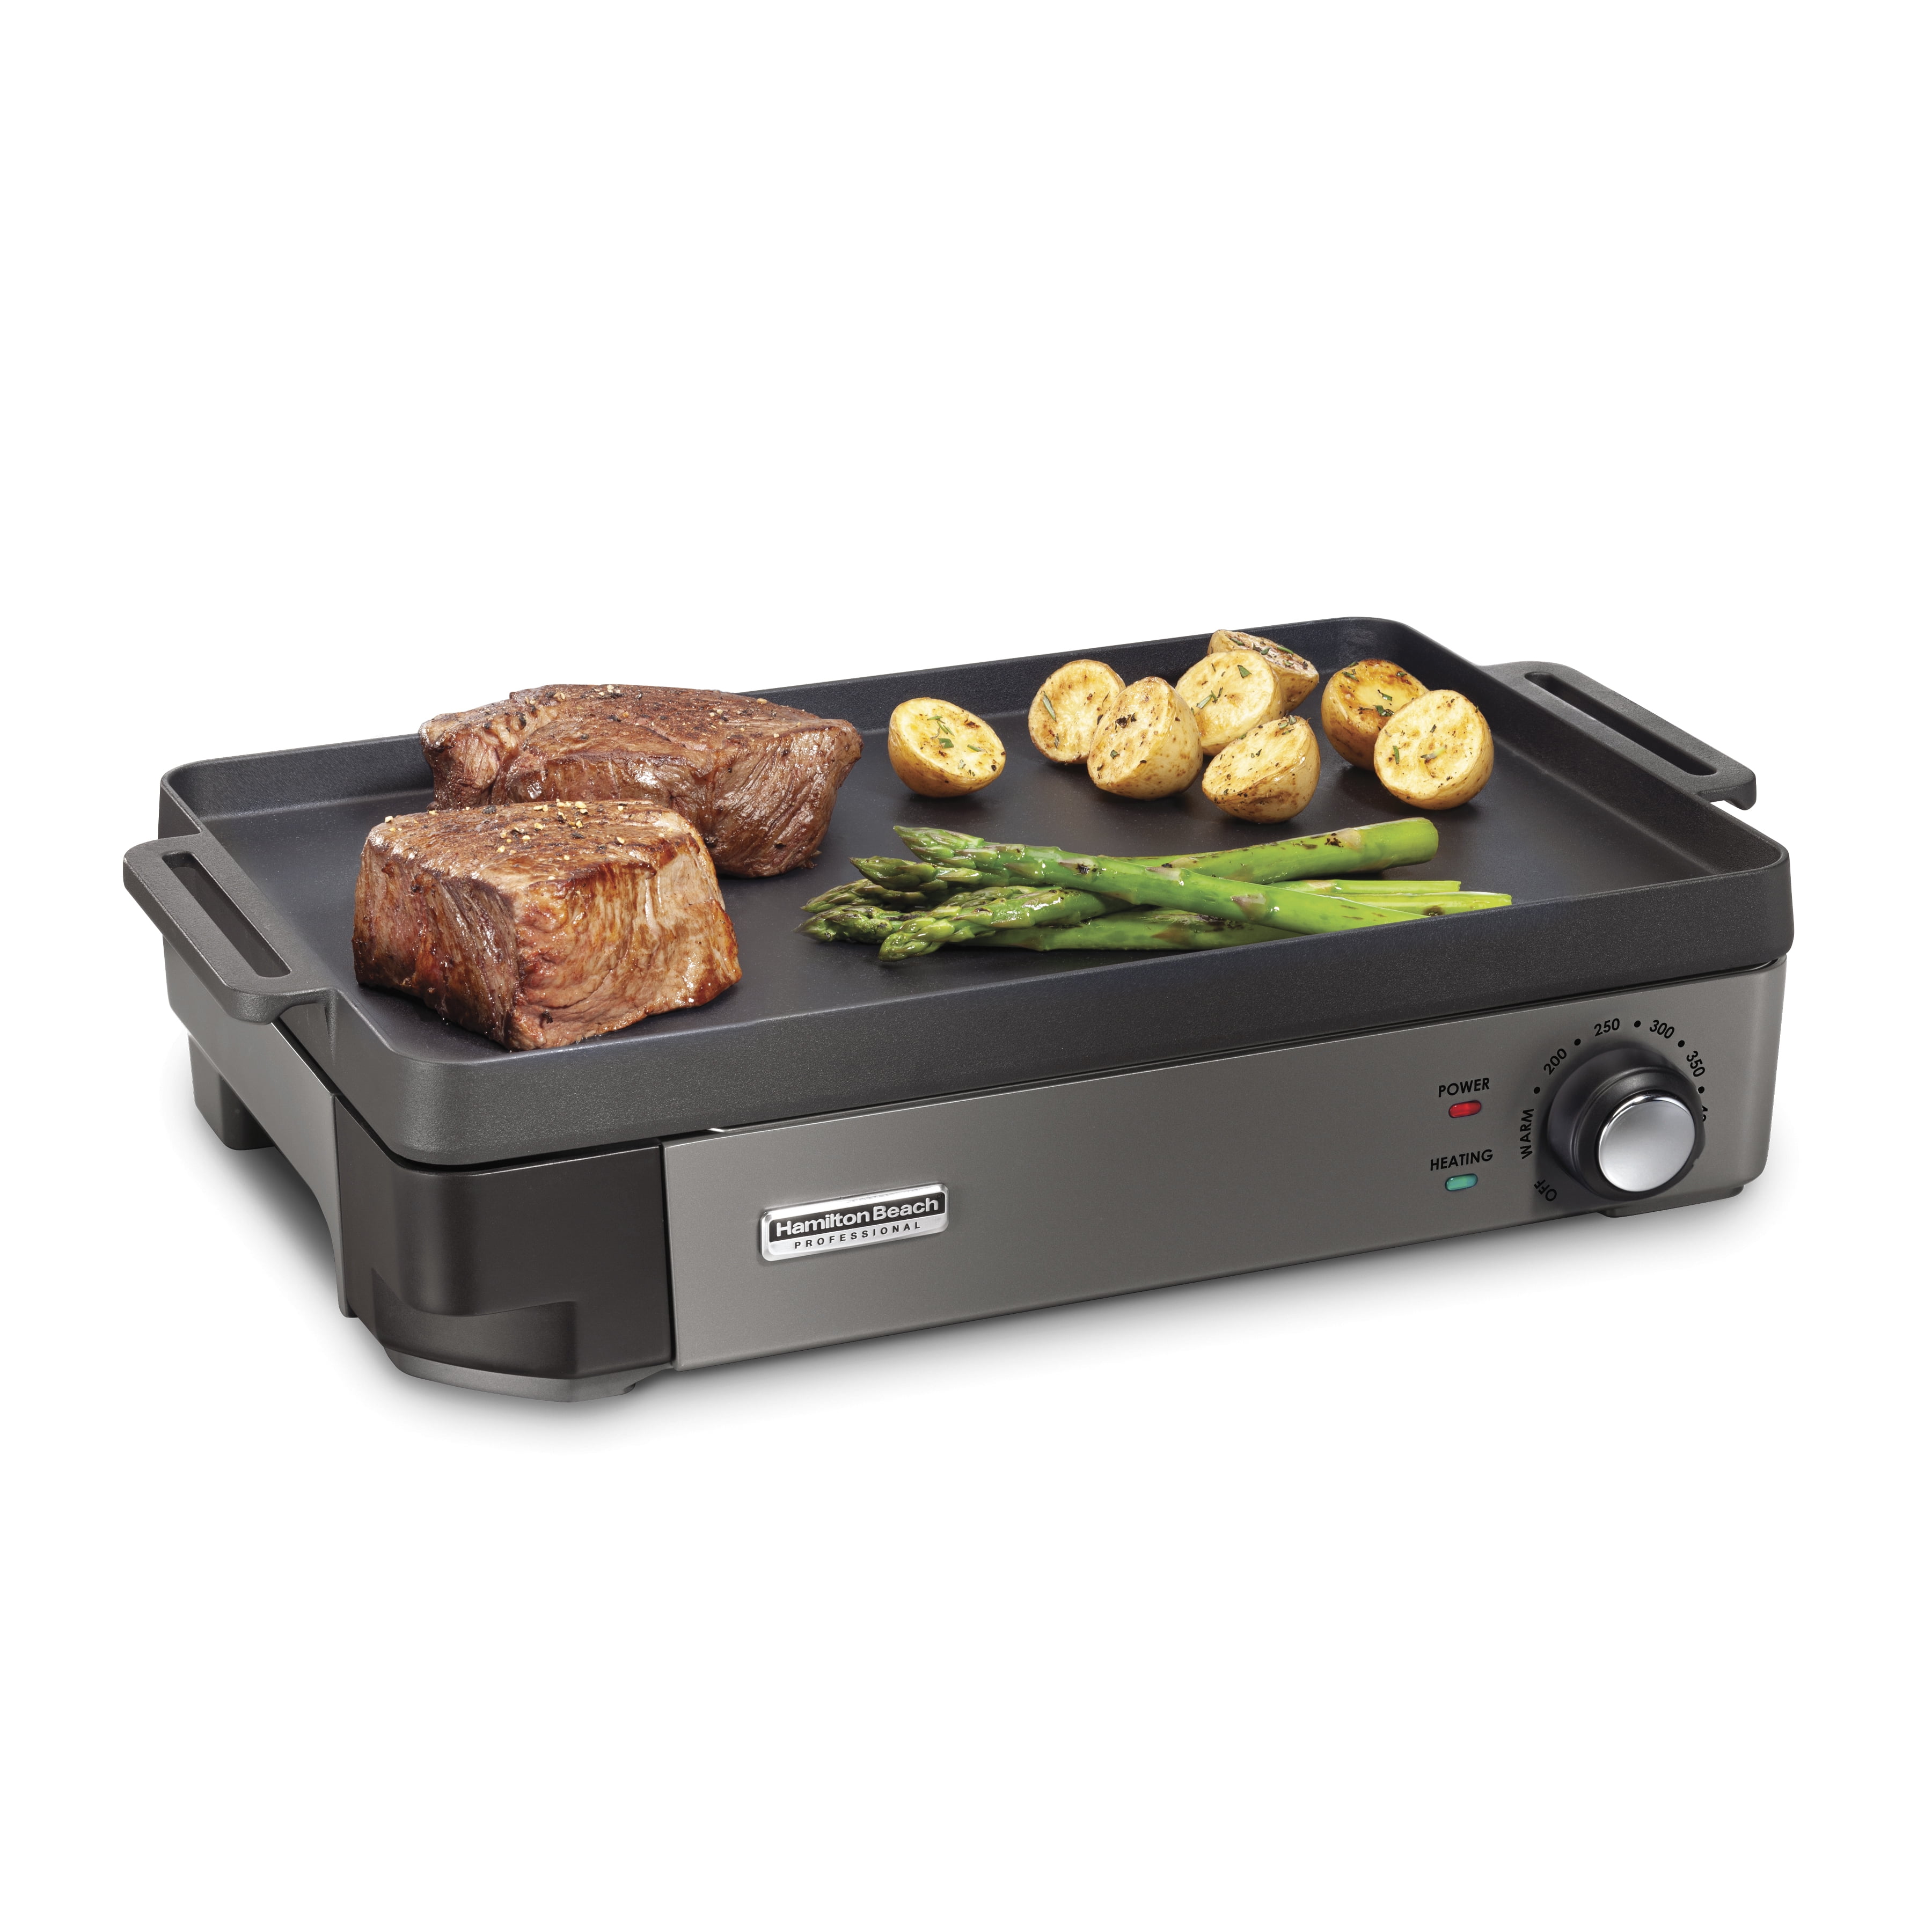 Hamilton Beach Professional Cast Iron Electric Grill, 10 x 16 Preseasoned  Cooking Surface, Adjustable Temperature up to 450° F, 38560 